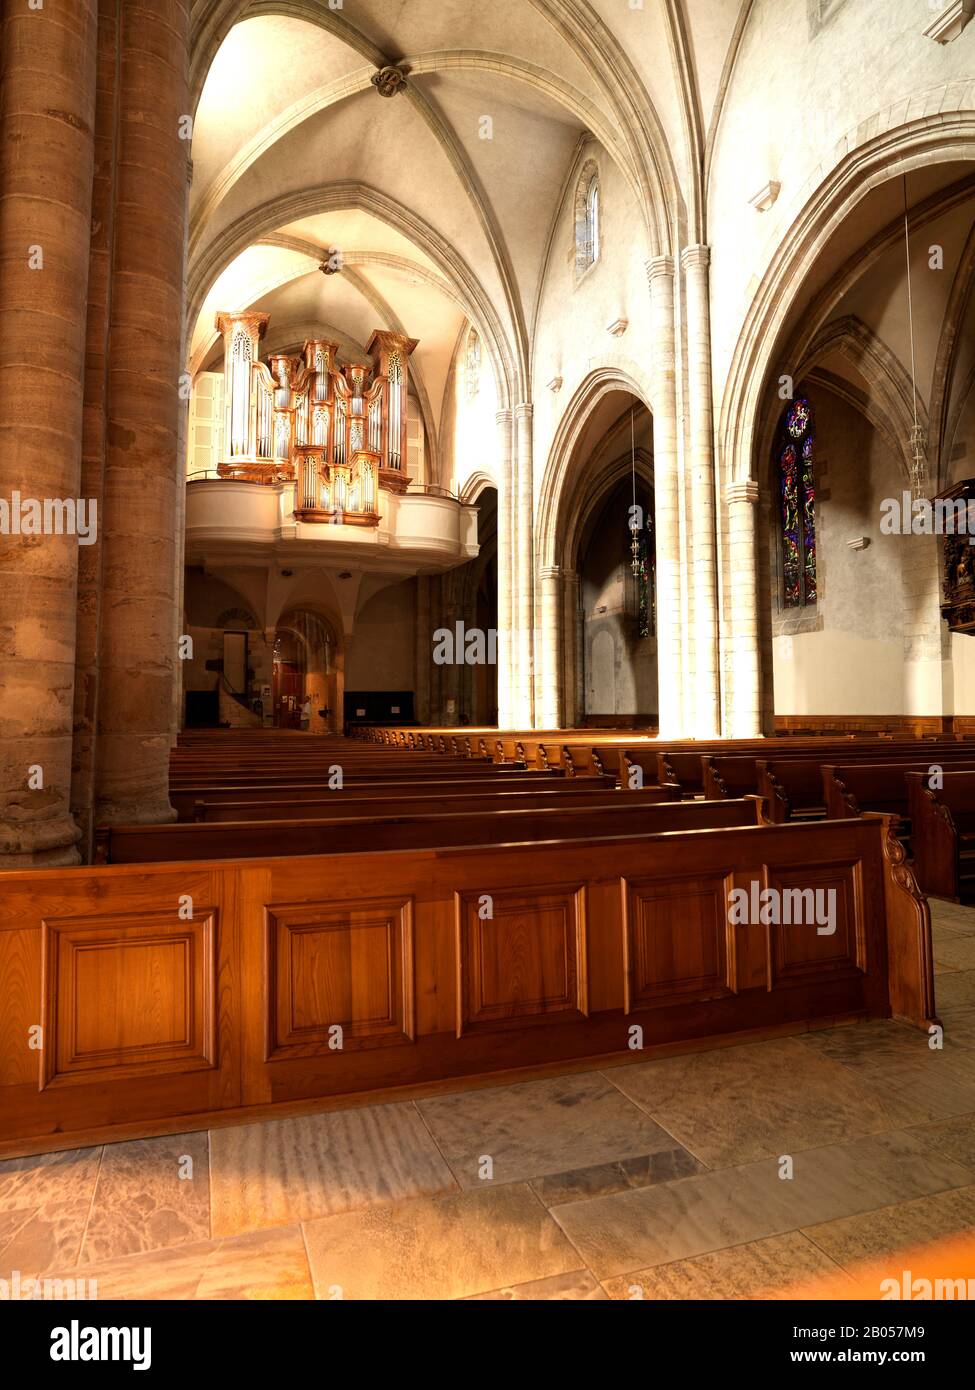 Interiors of a church, Cathedral Notre Dame du Glarier, Sion, Valais Canton, Switzerland Stock Photo